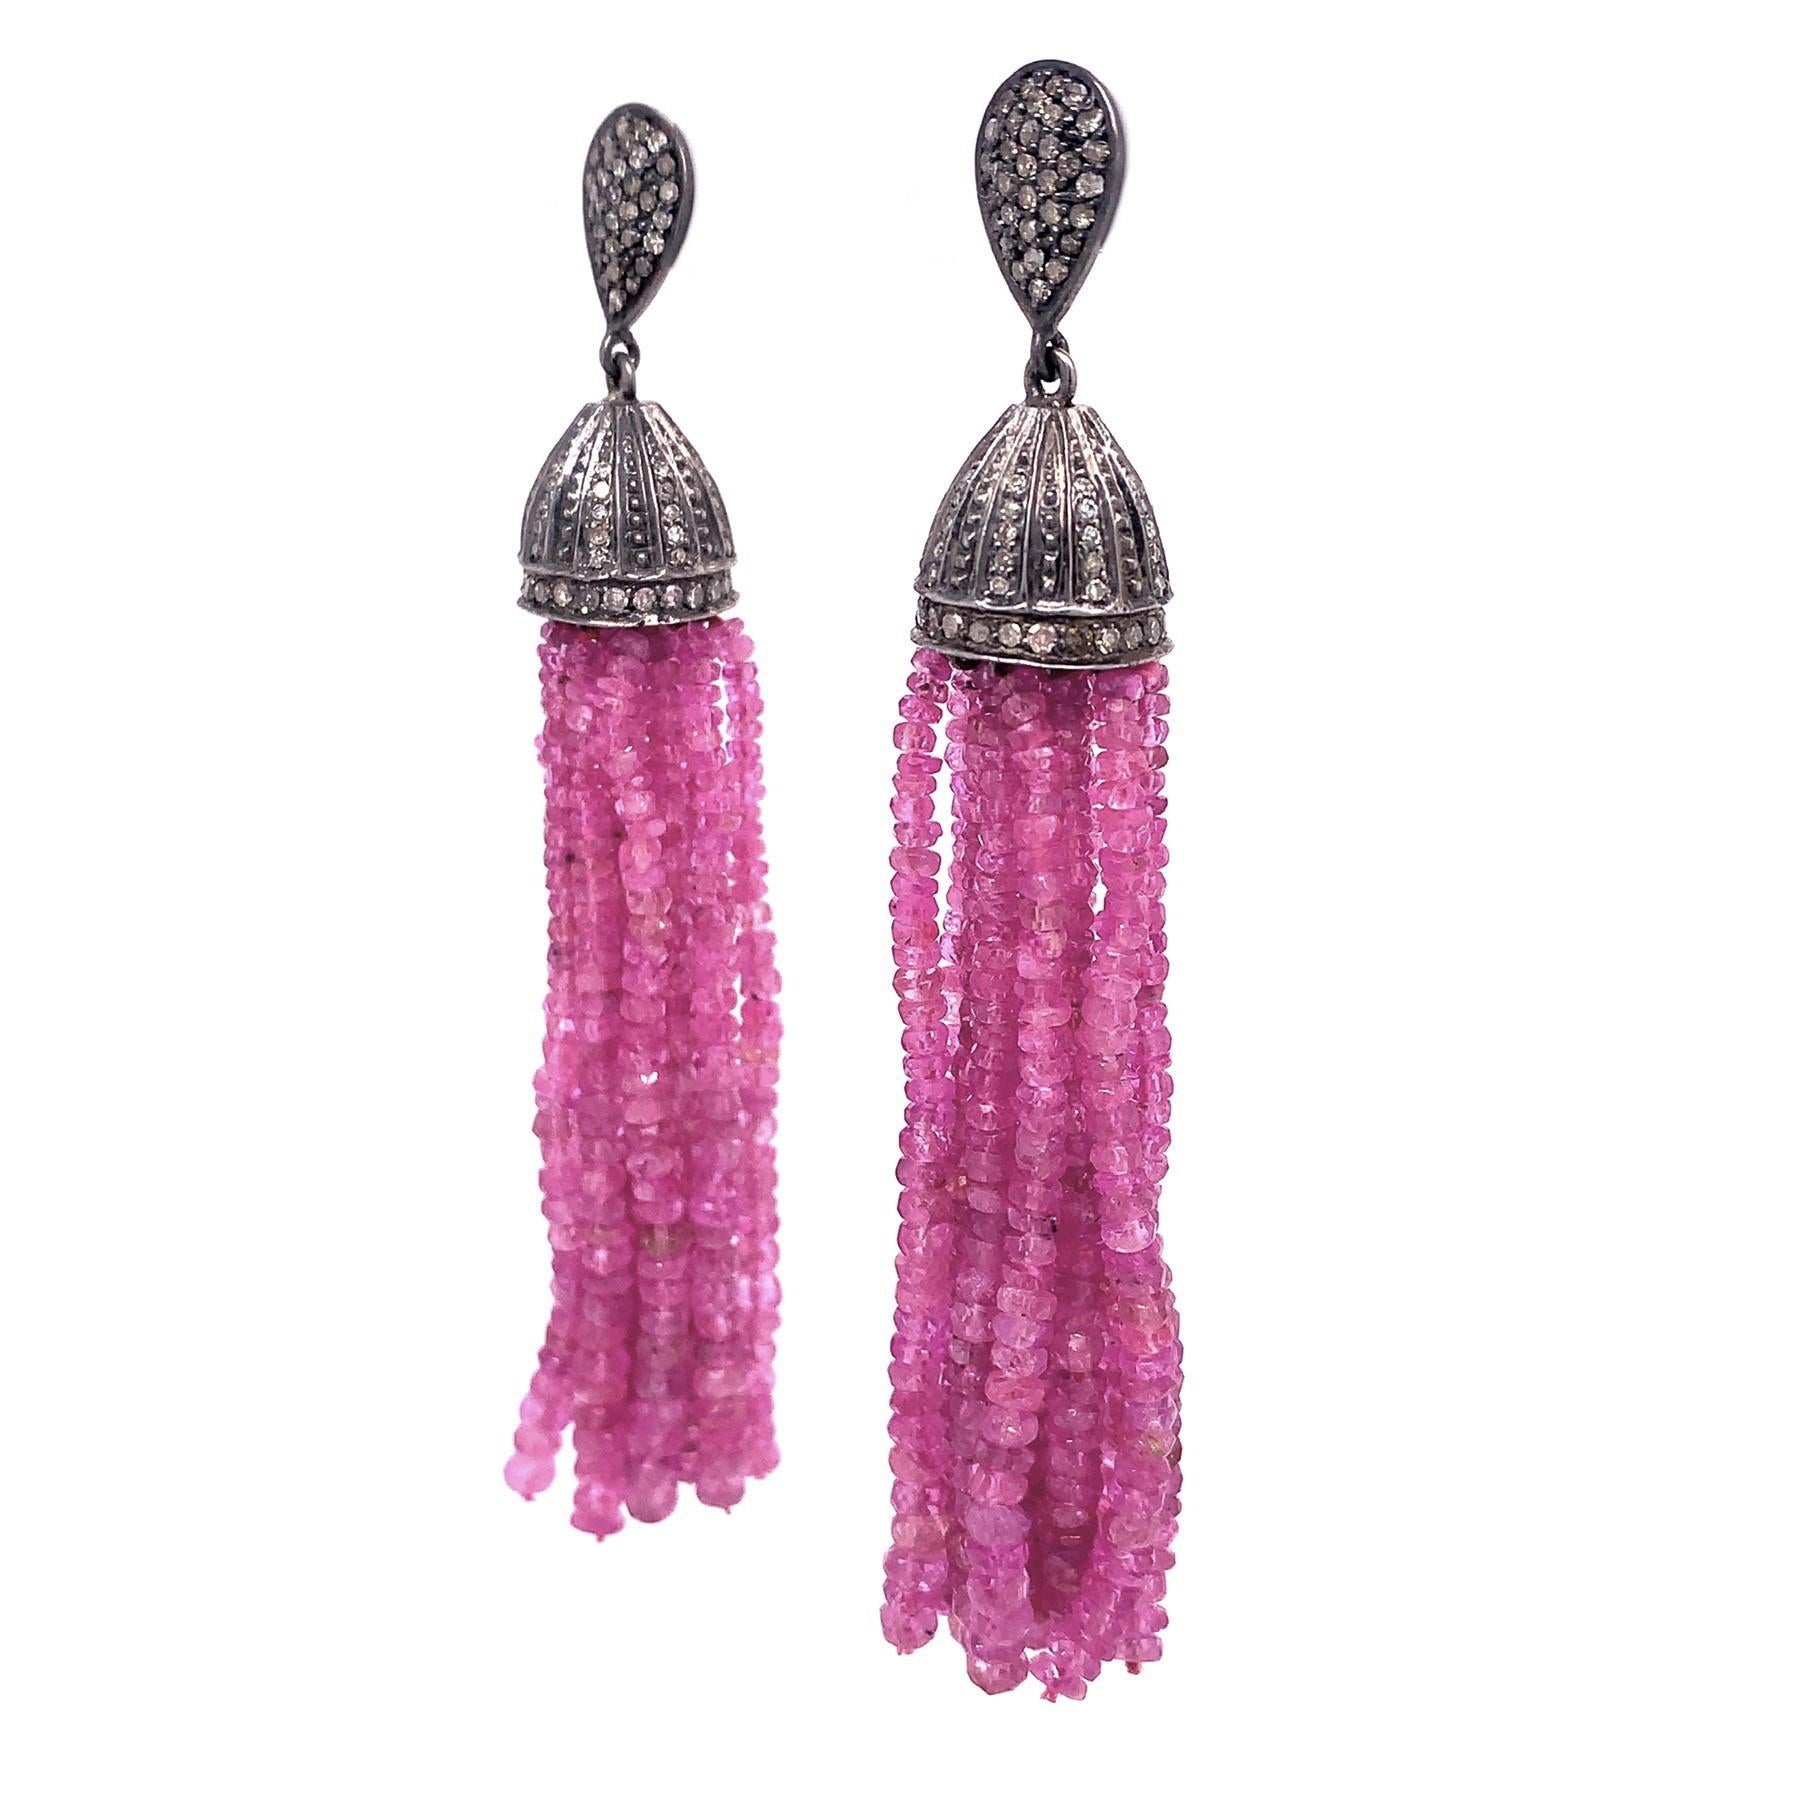 Life in color collection

Rustic diamonds with Pink Sapphire bead Tassel earring set in sterling silver.

Pink Sapphire : 123.99ct total weight.
Diamond : 1.50ct total weight.